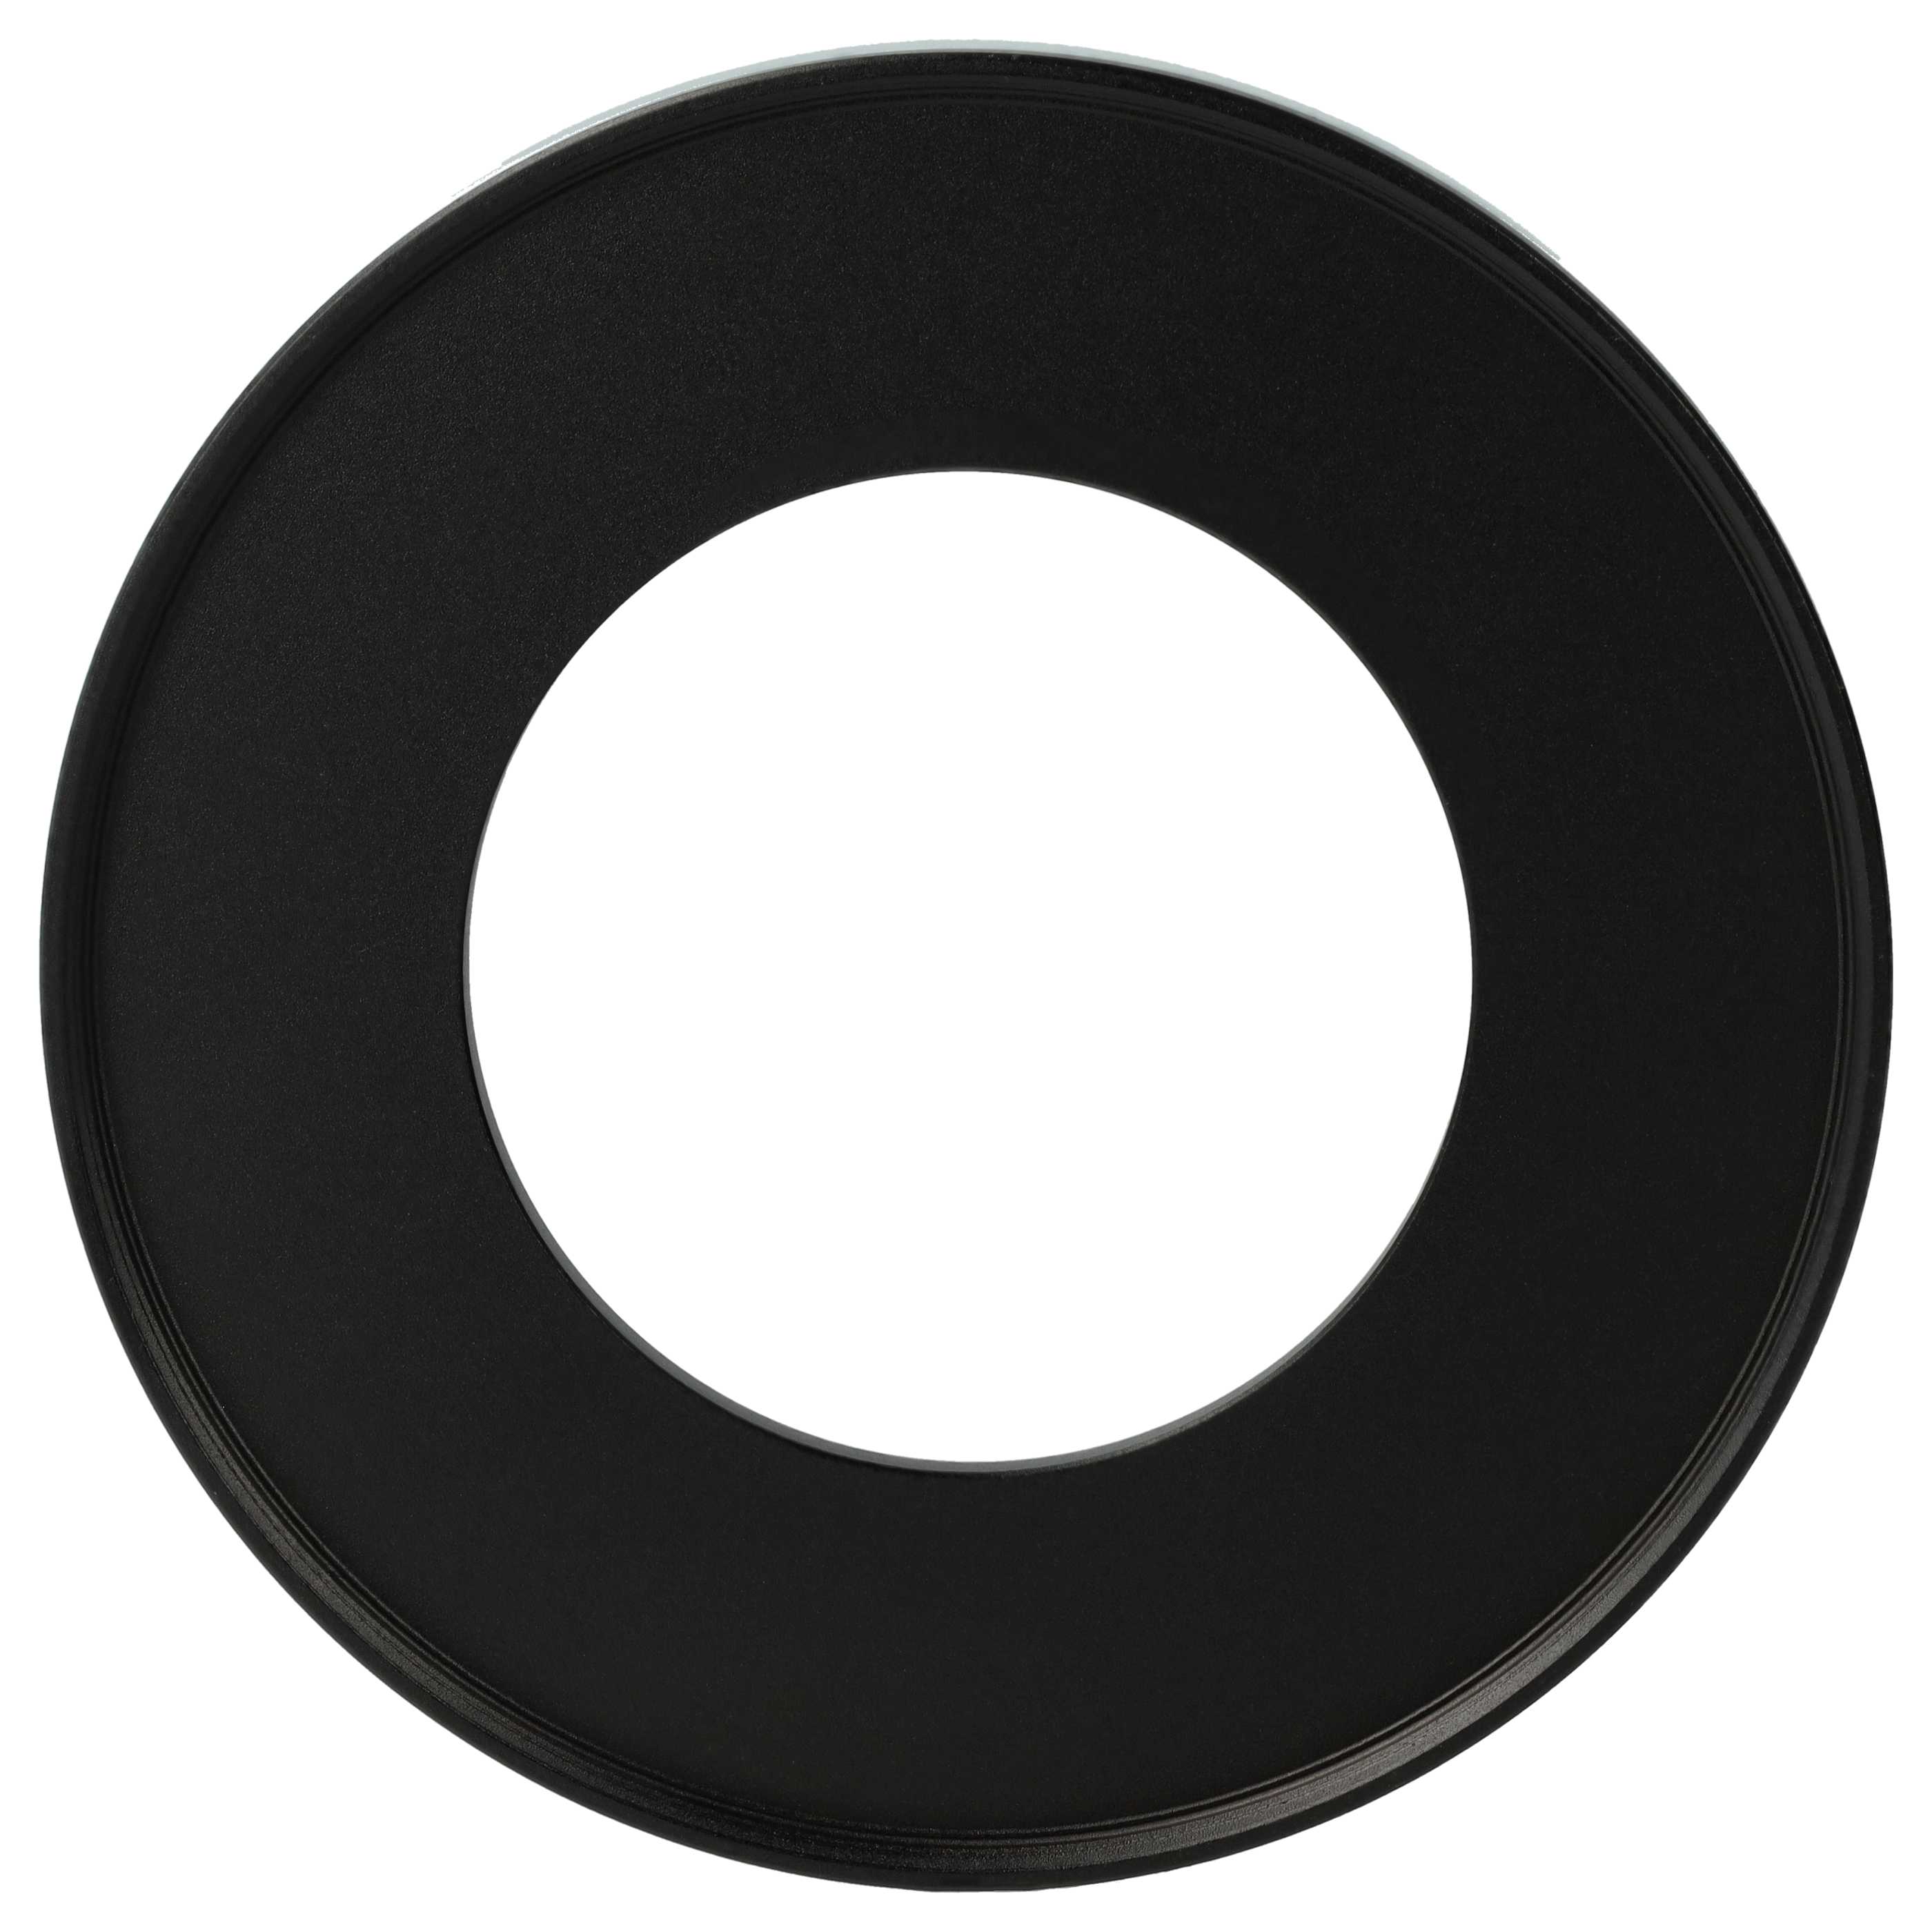 Step-Up Ring Adapter of 49 mm to 82 mmfor various Camera Lens - Filter Adapter